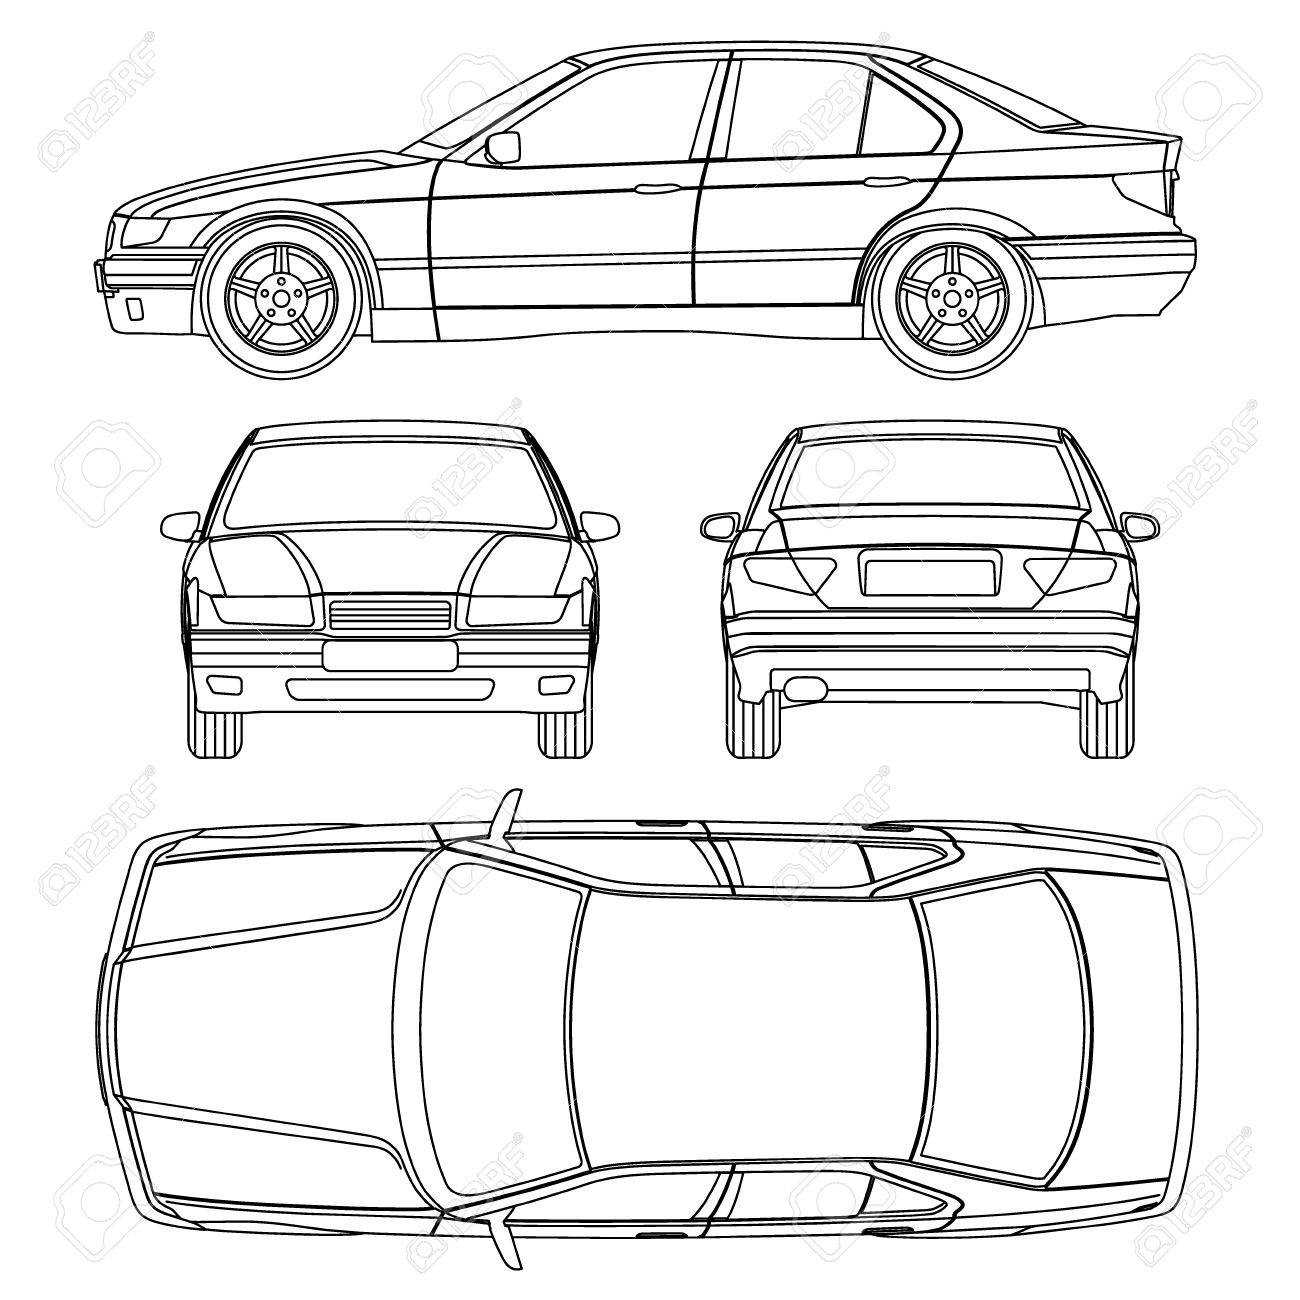 Car Line Draw Insurance Damage, Condition Report Form Within Car Damage Report Template